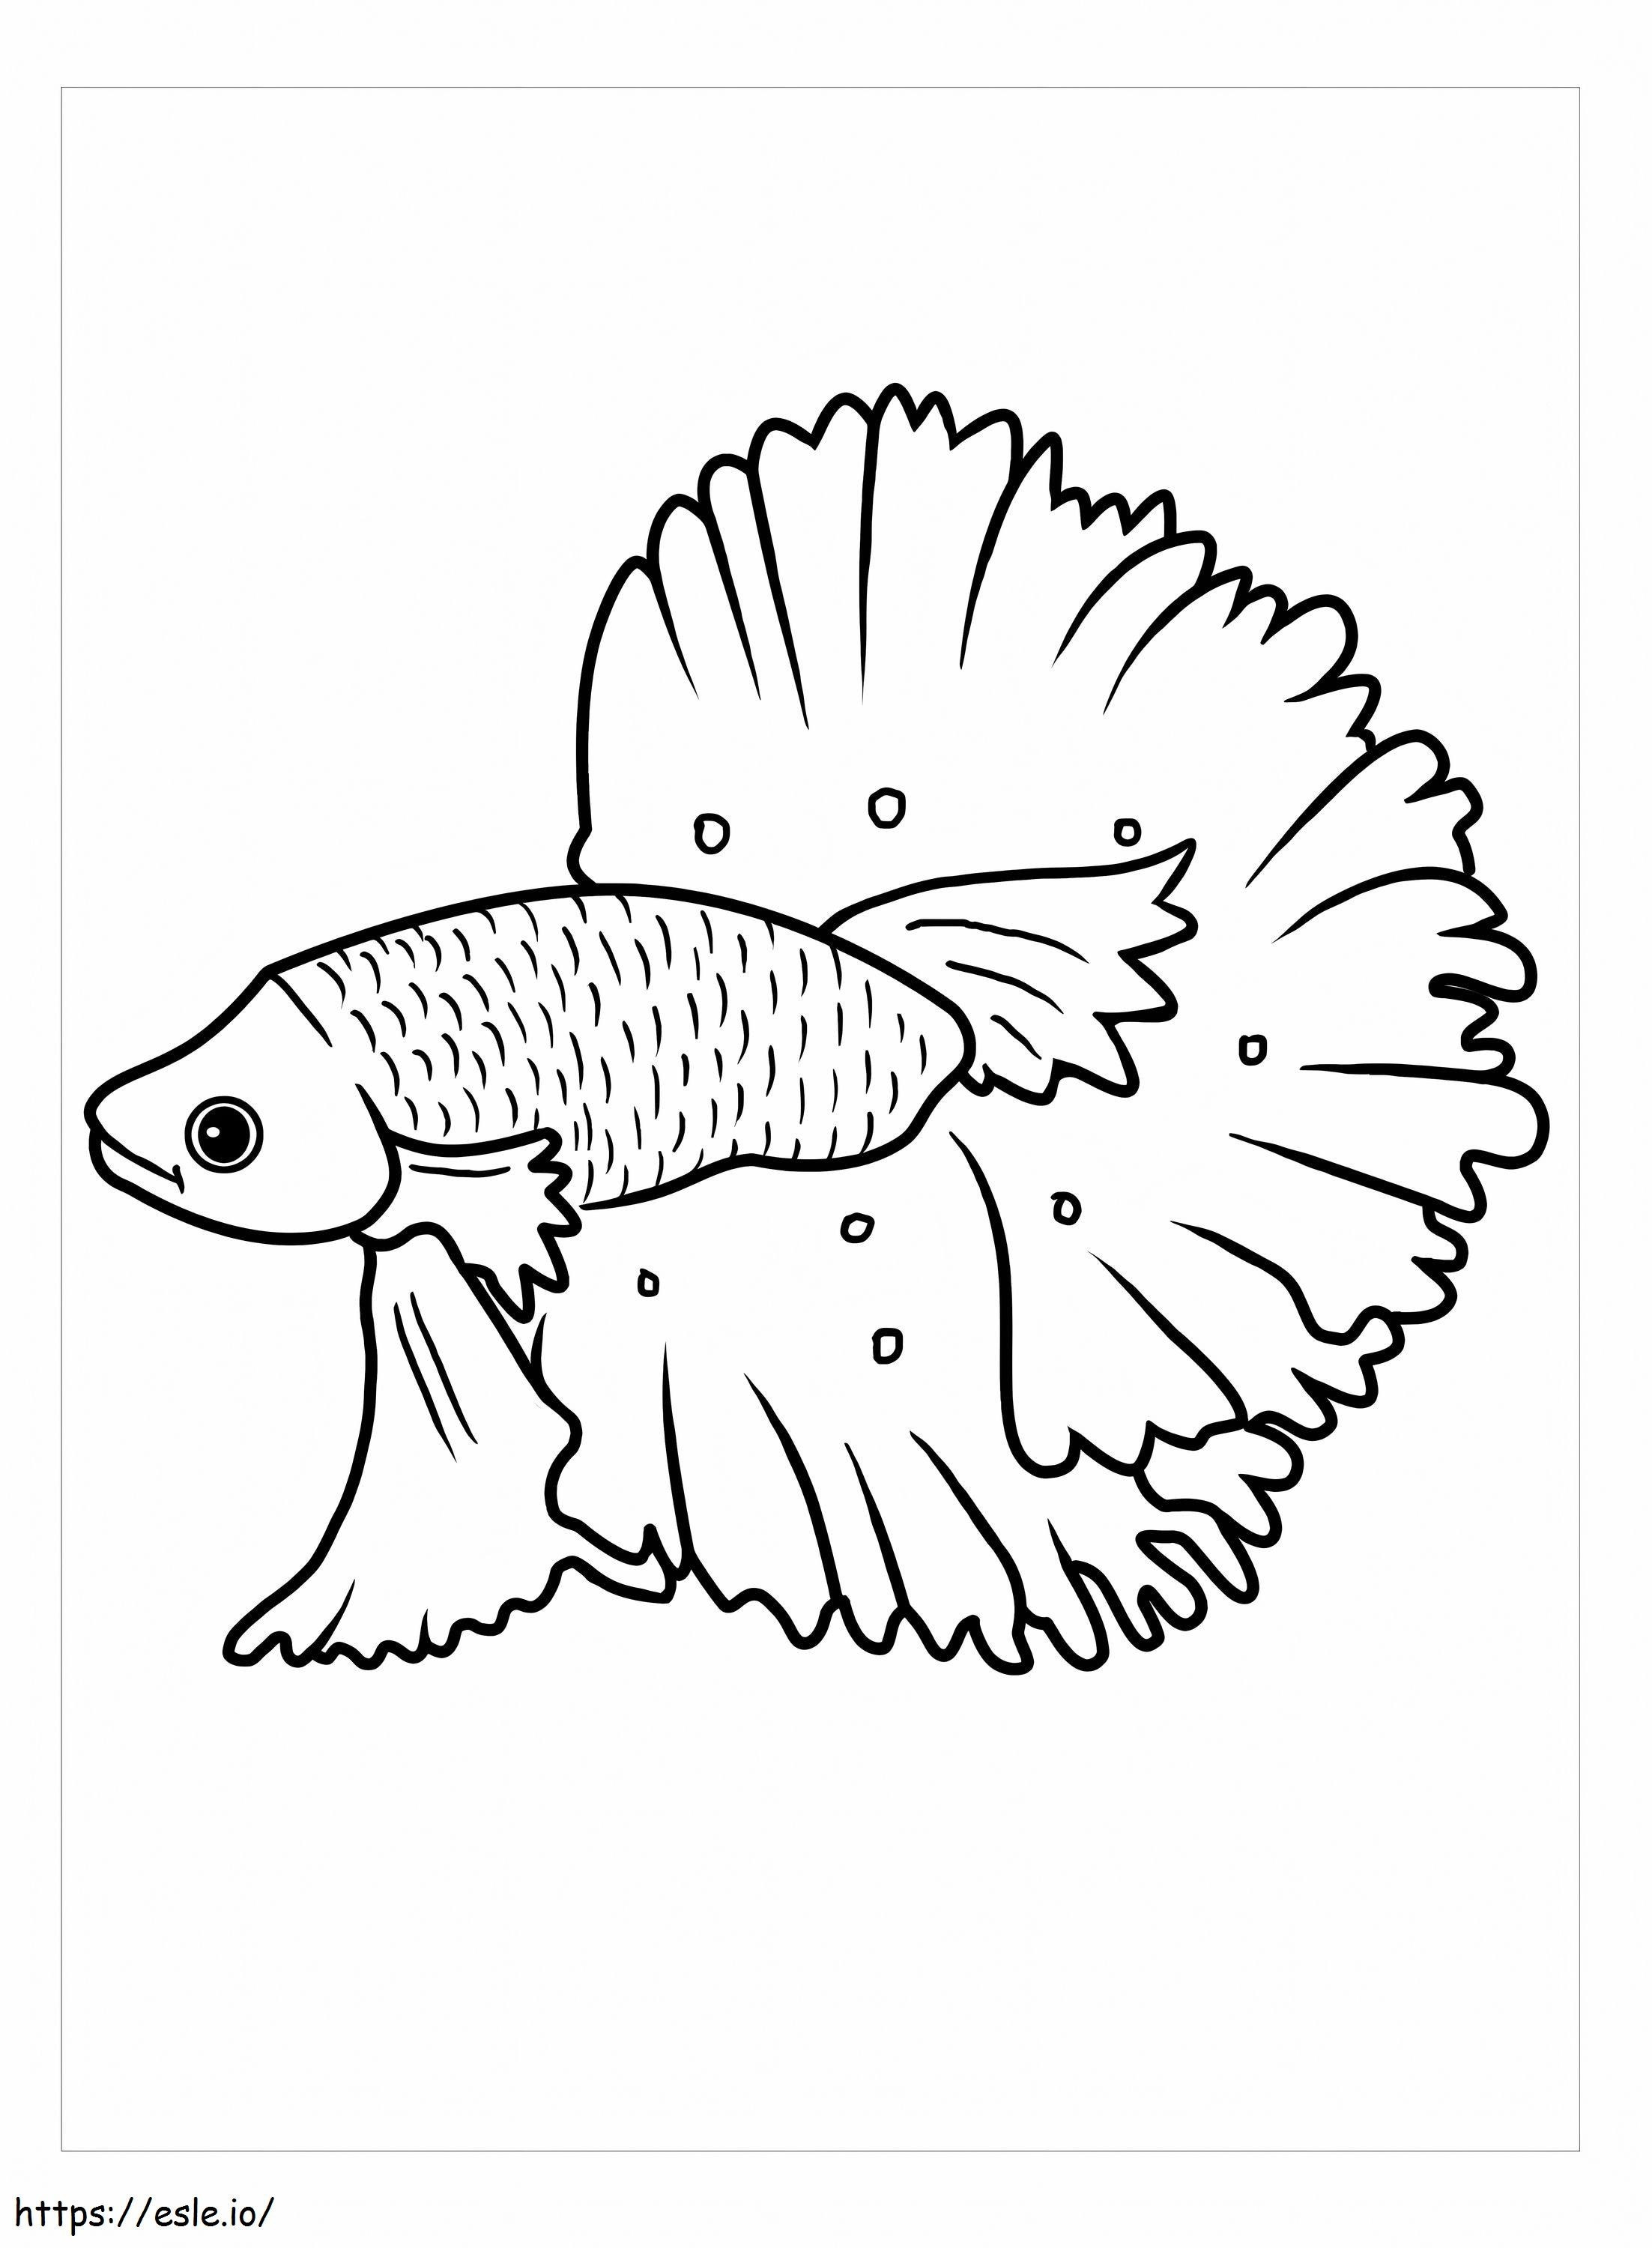 Perfect Fish coloring page